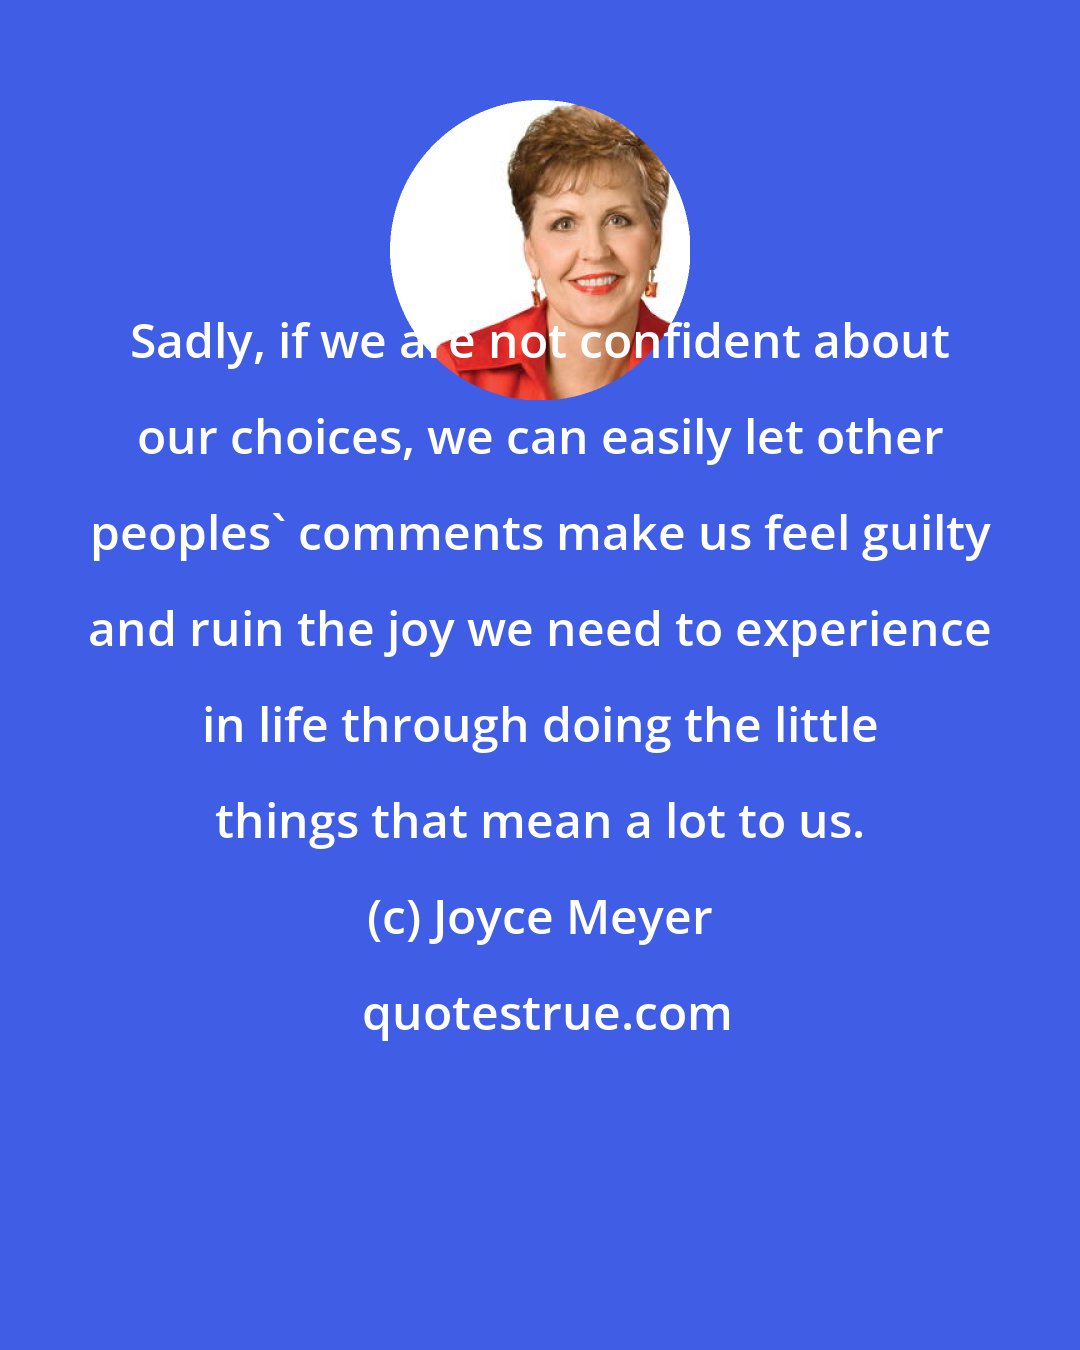 Joyce Meyer: Sadly, if we are not confident about our choices, we can easily let other peoples' comments make us feel guilty and ruin the joy we need to experience in life through doing the little things that mean a lot to us.